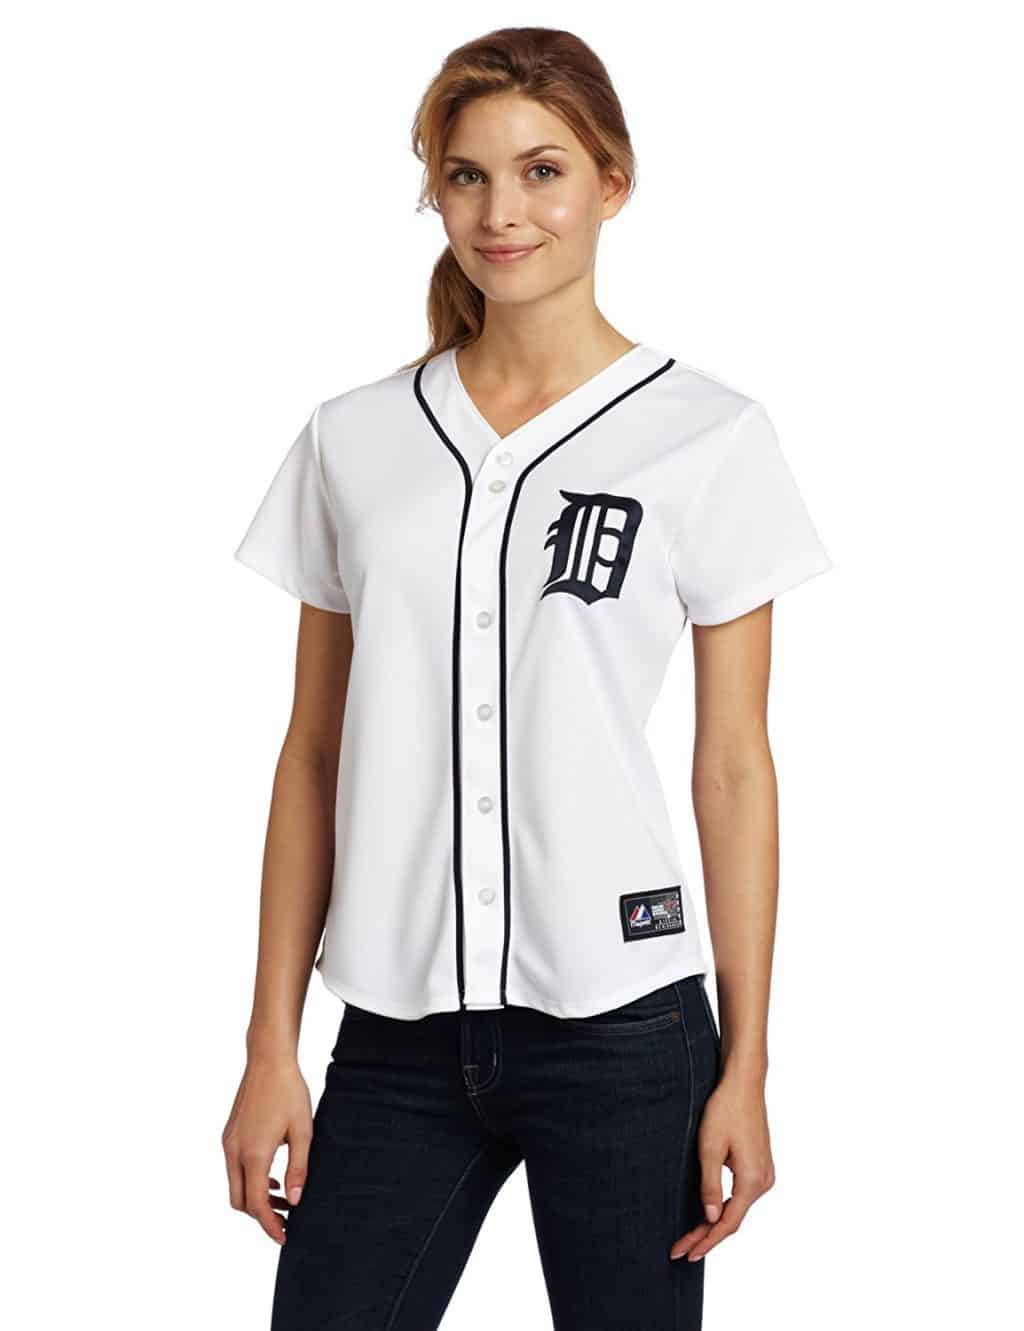 womens tigers jersey